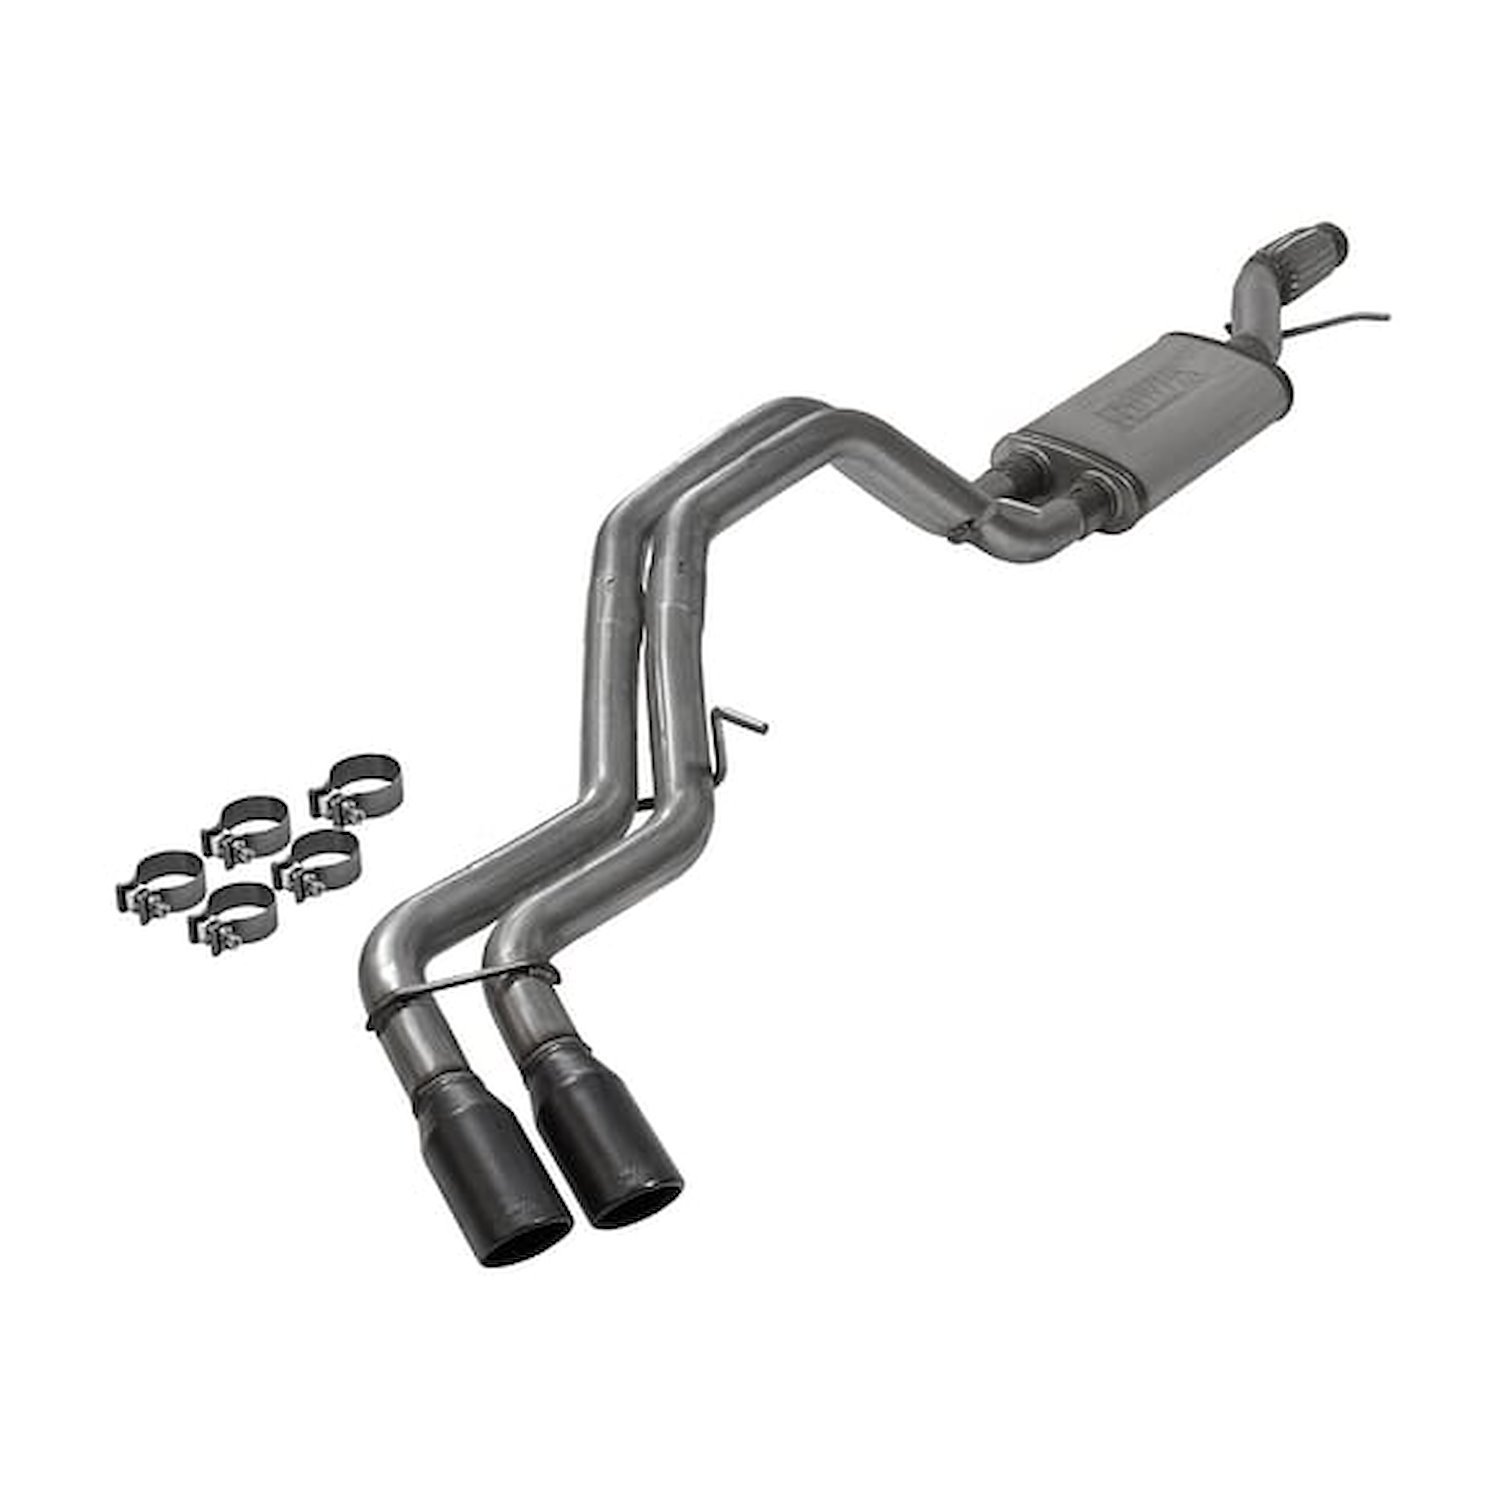 717986 FlowFX Cat-Back Exhaust System for 2015-2020 Chevy